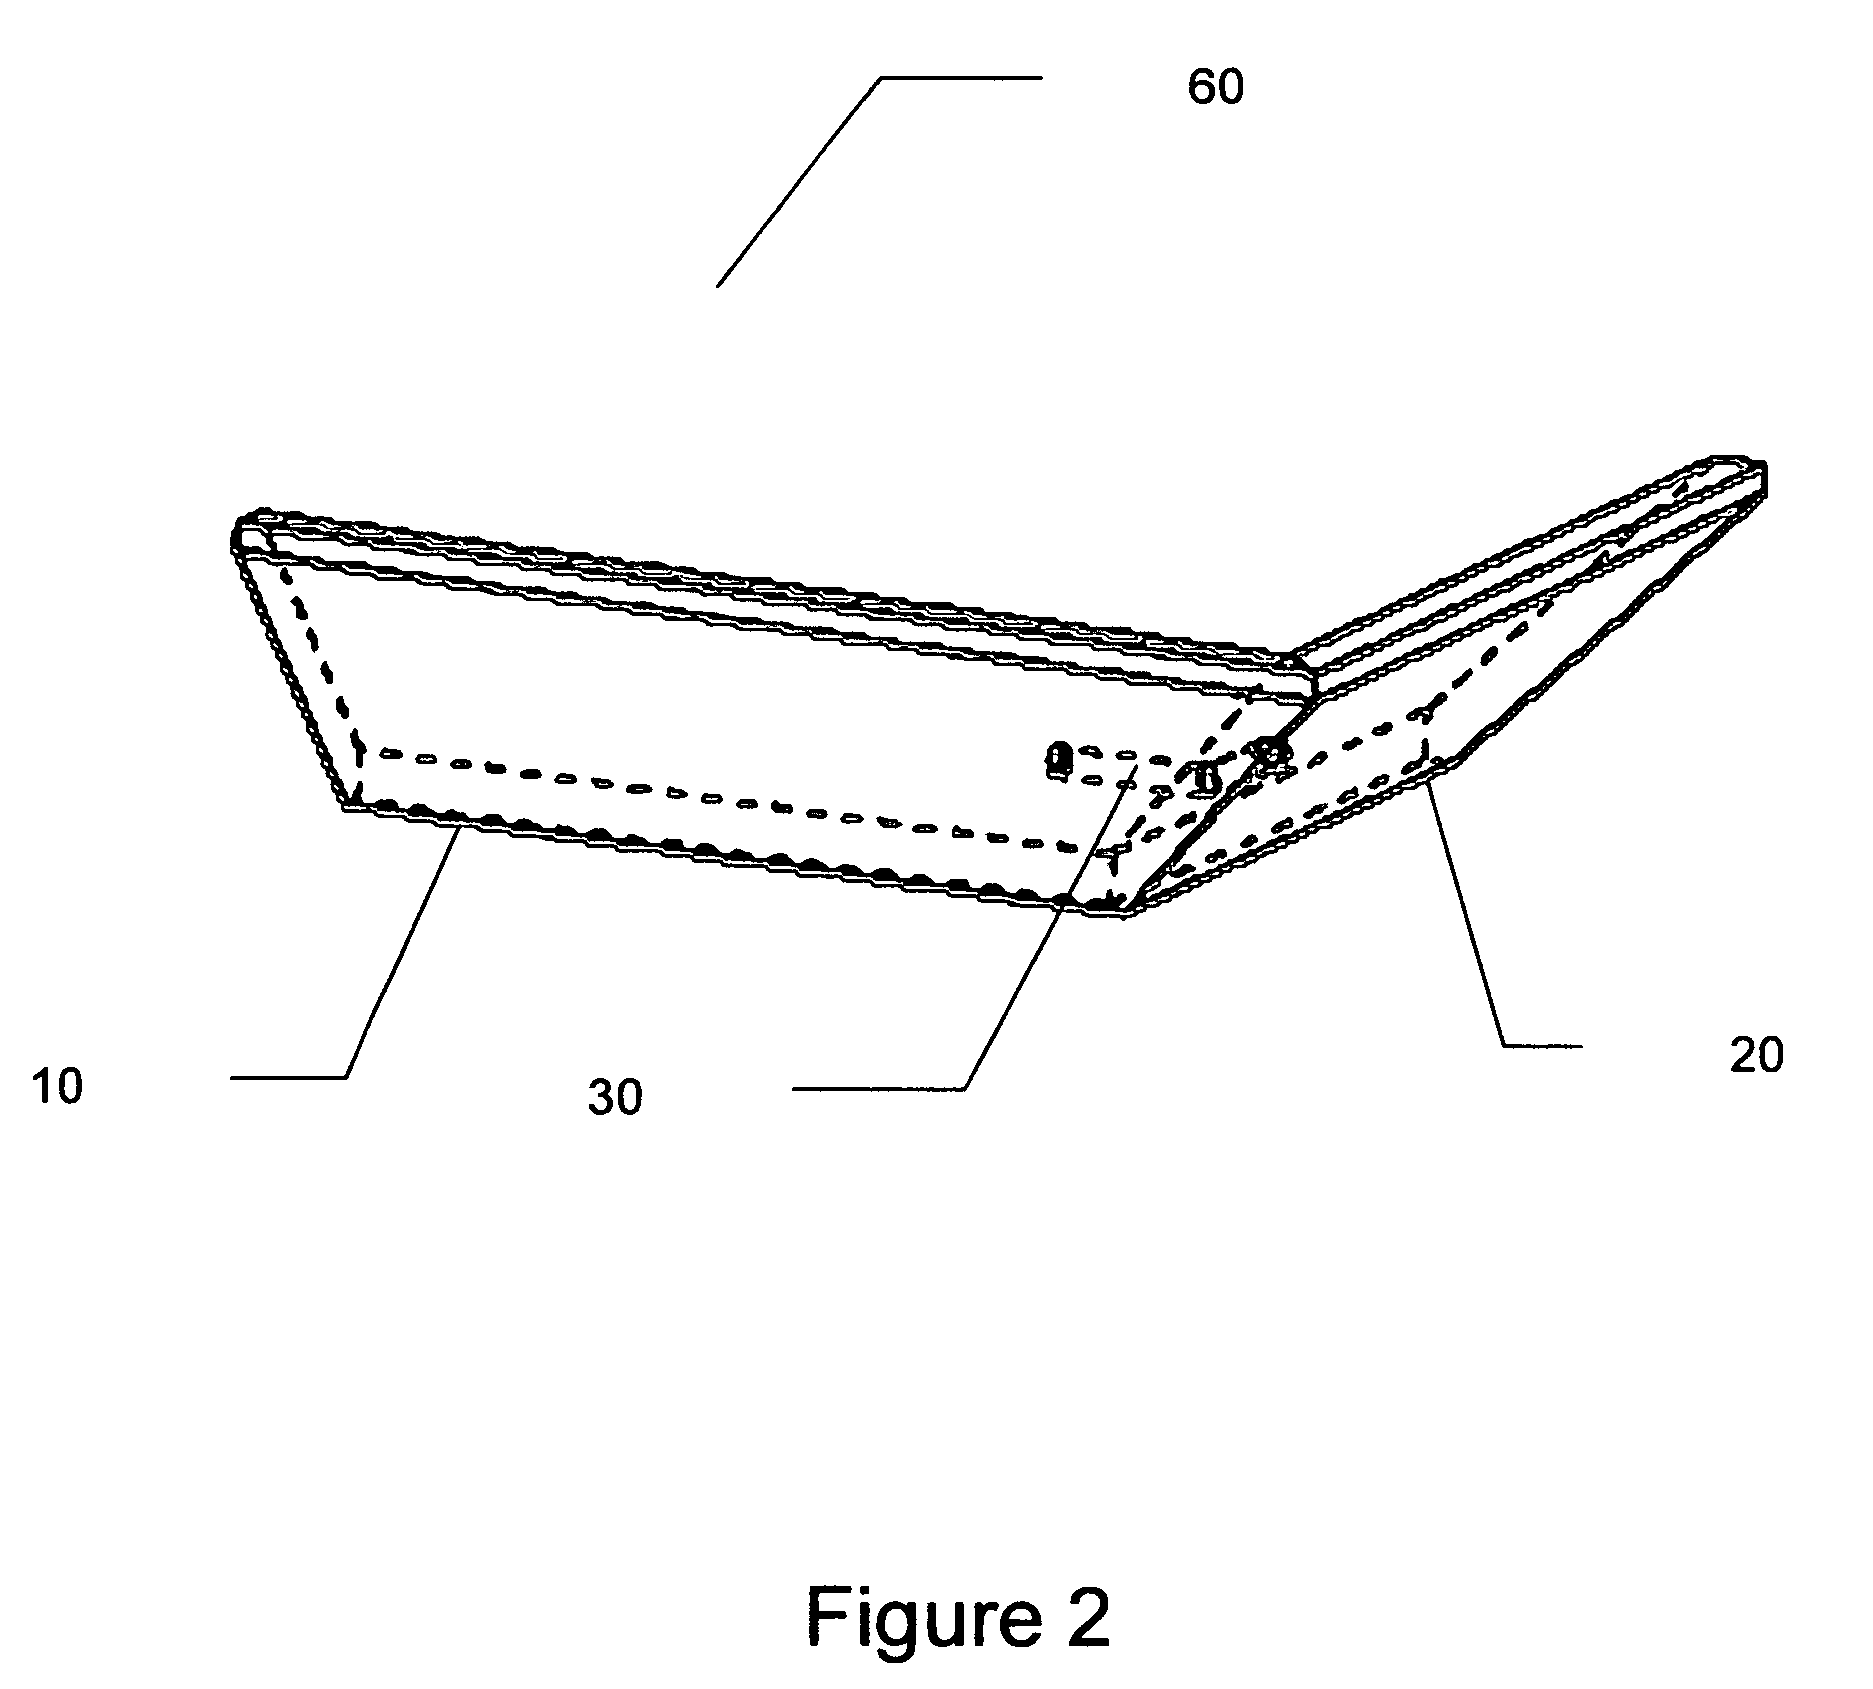 Apparatus and method for facilitating accurate placement and installation of molding